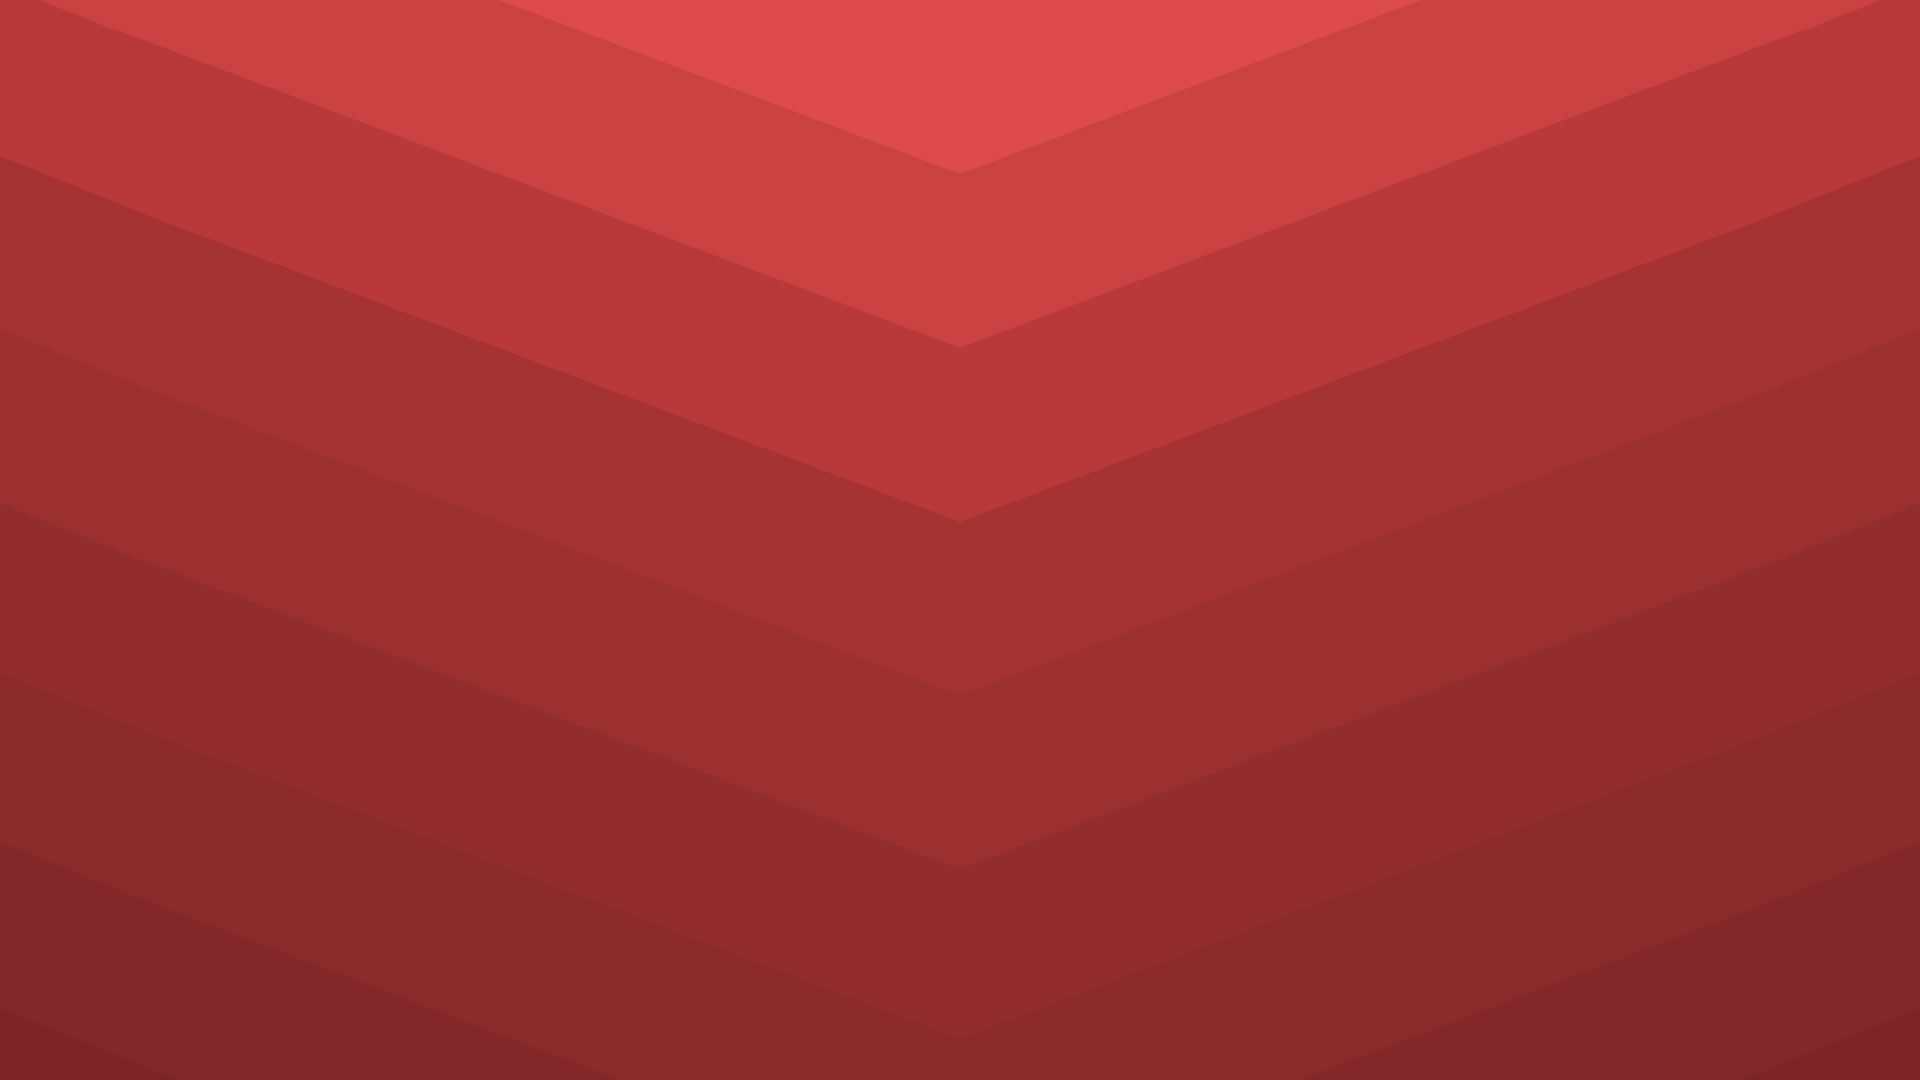 General 1920x1080 gradient red texture red background